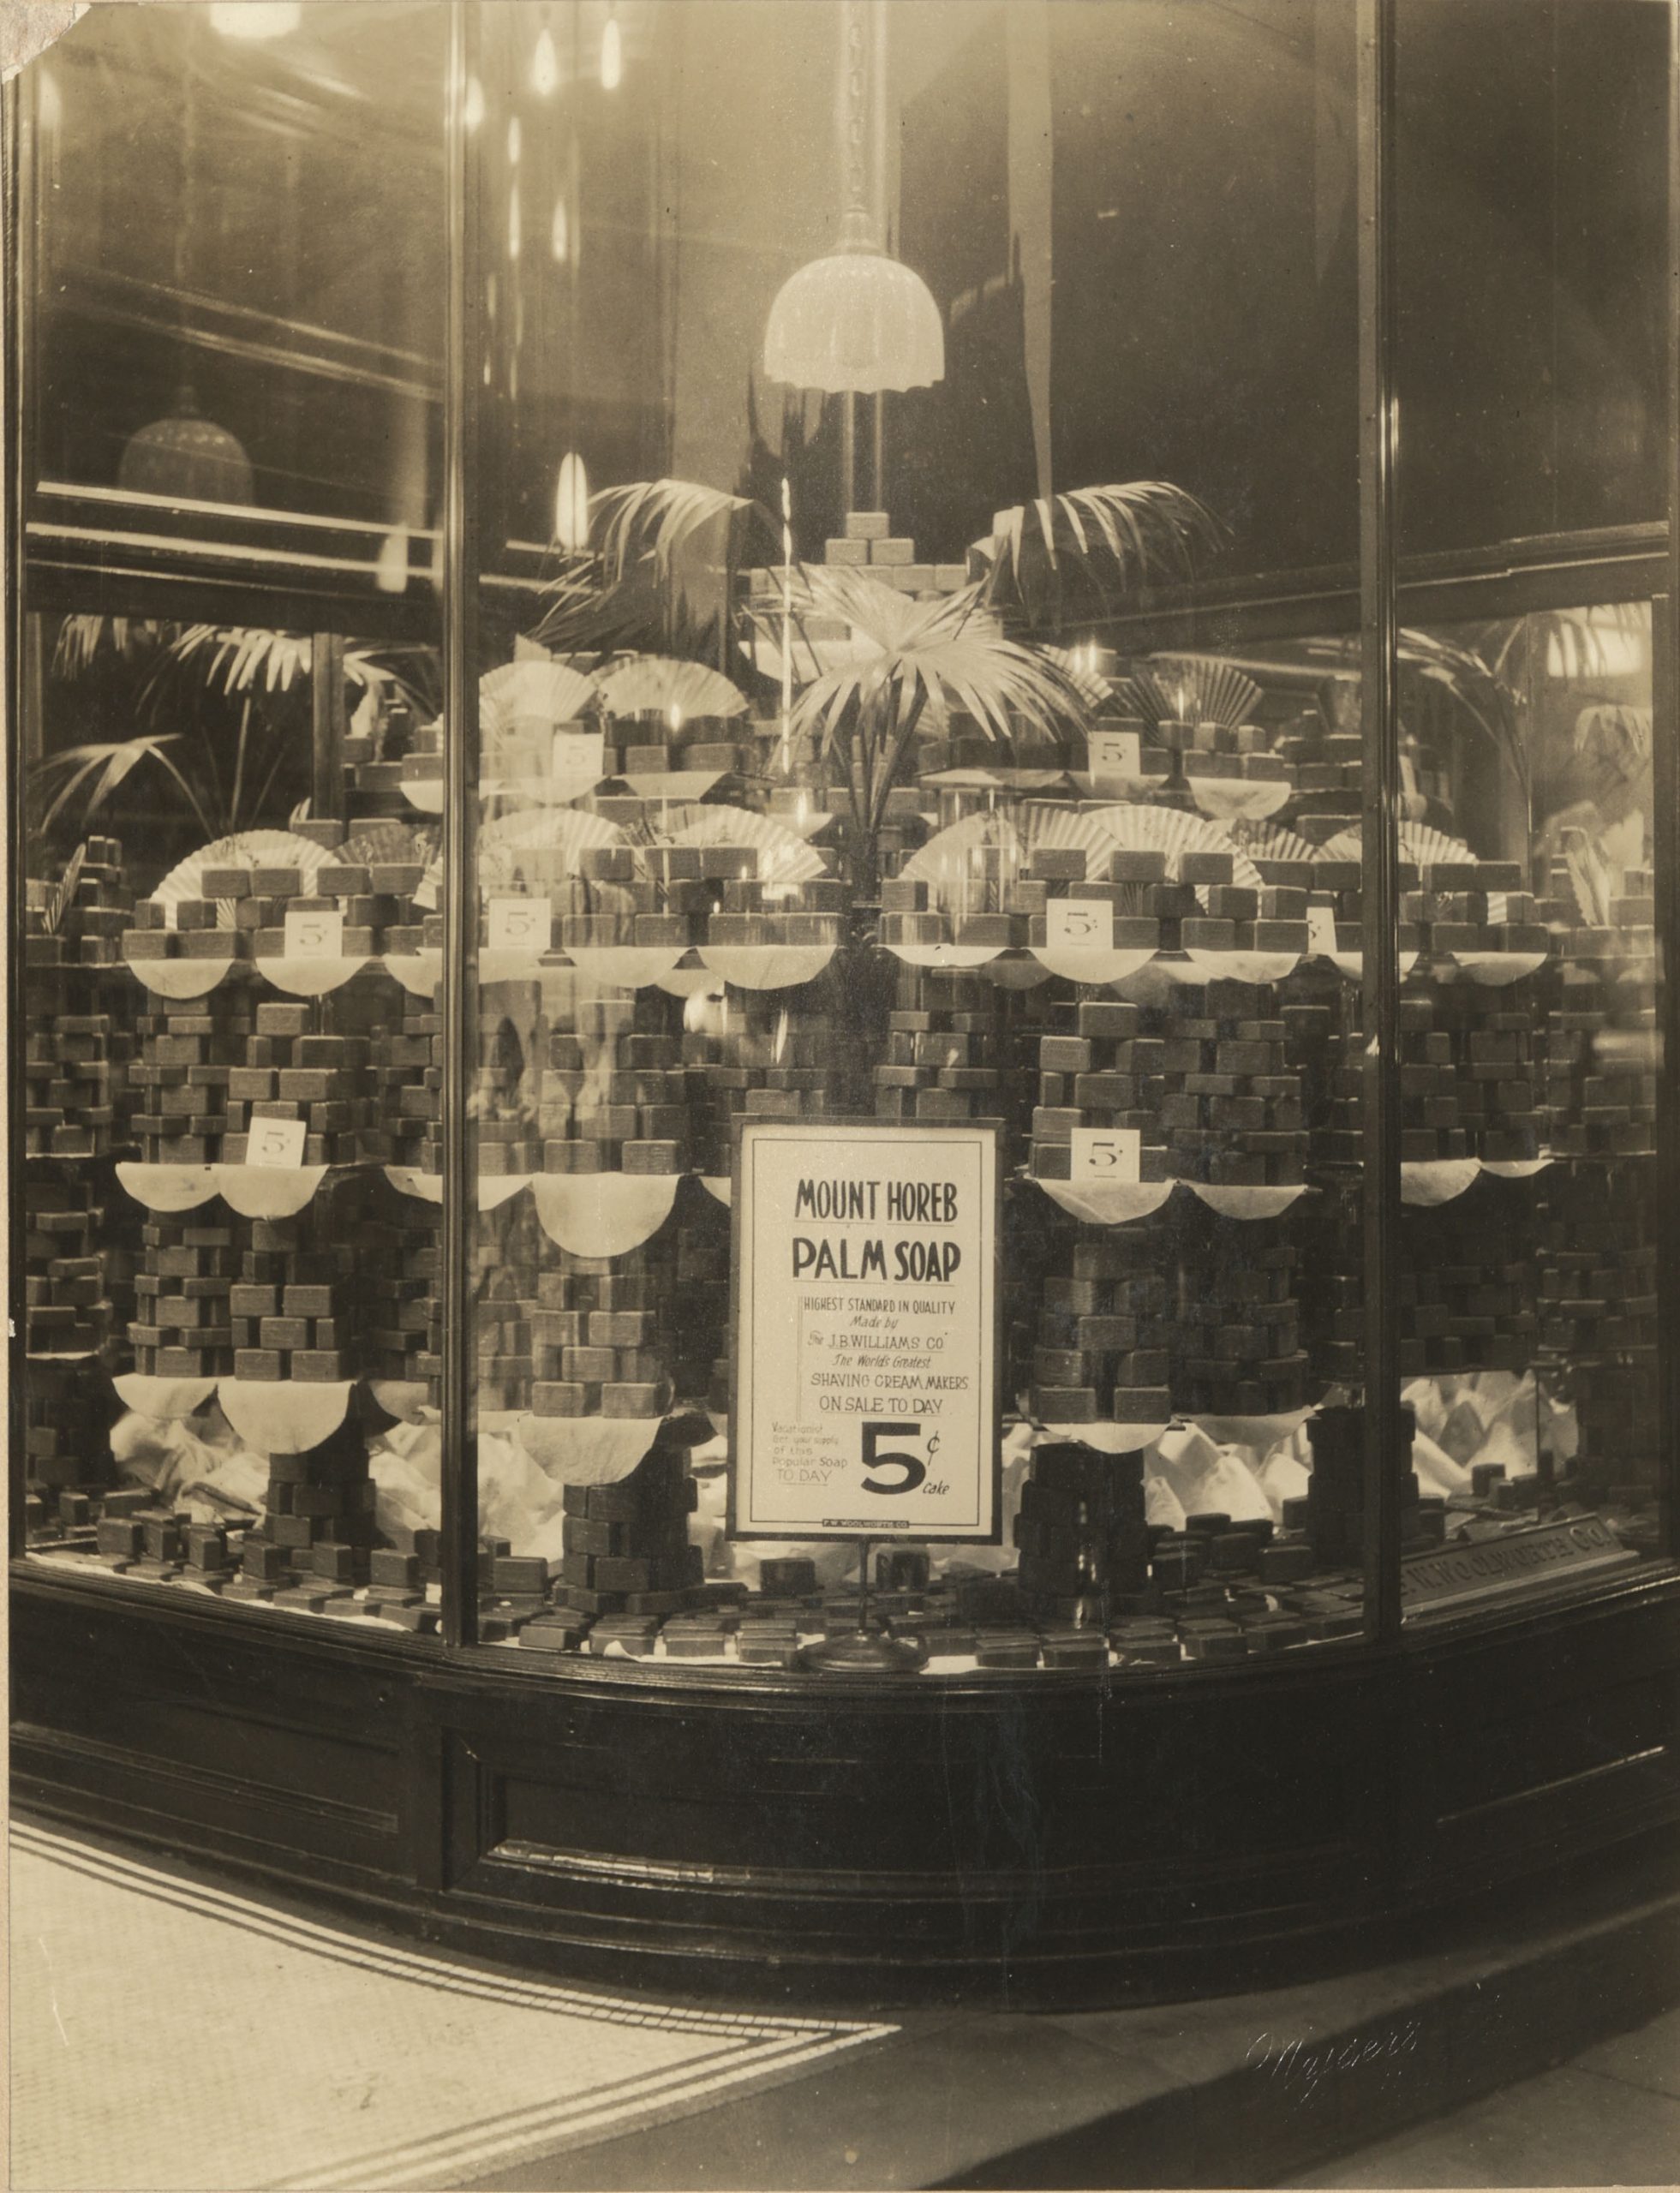 Woolworth display of Mount Horeb soap, ca. 1930s